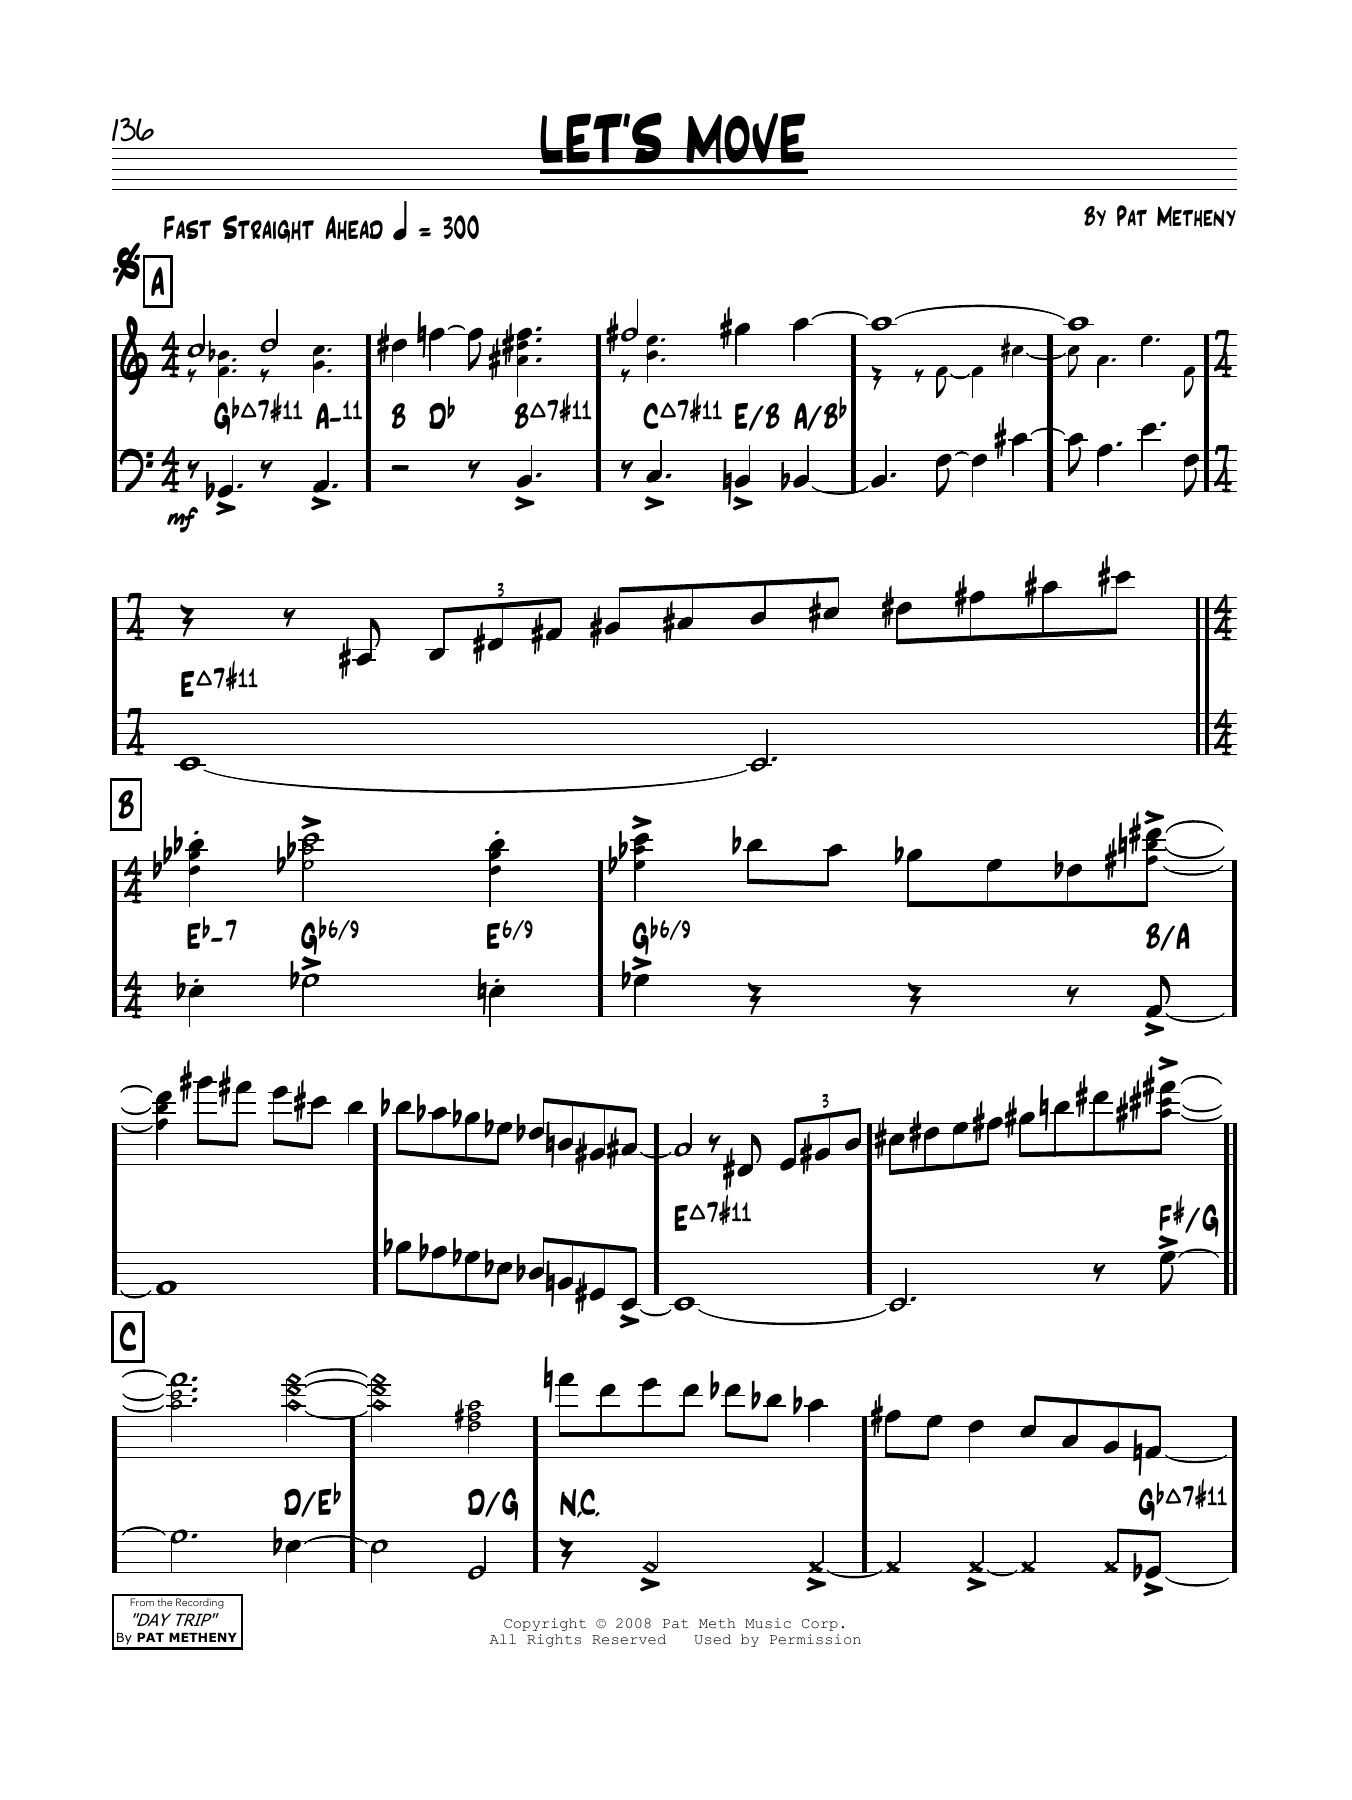 Download Pat Metheny Let's Move Sheet Music